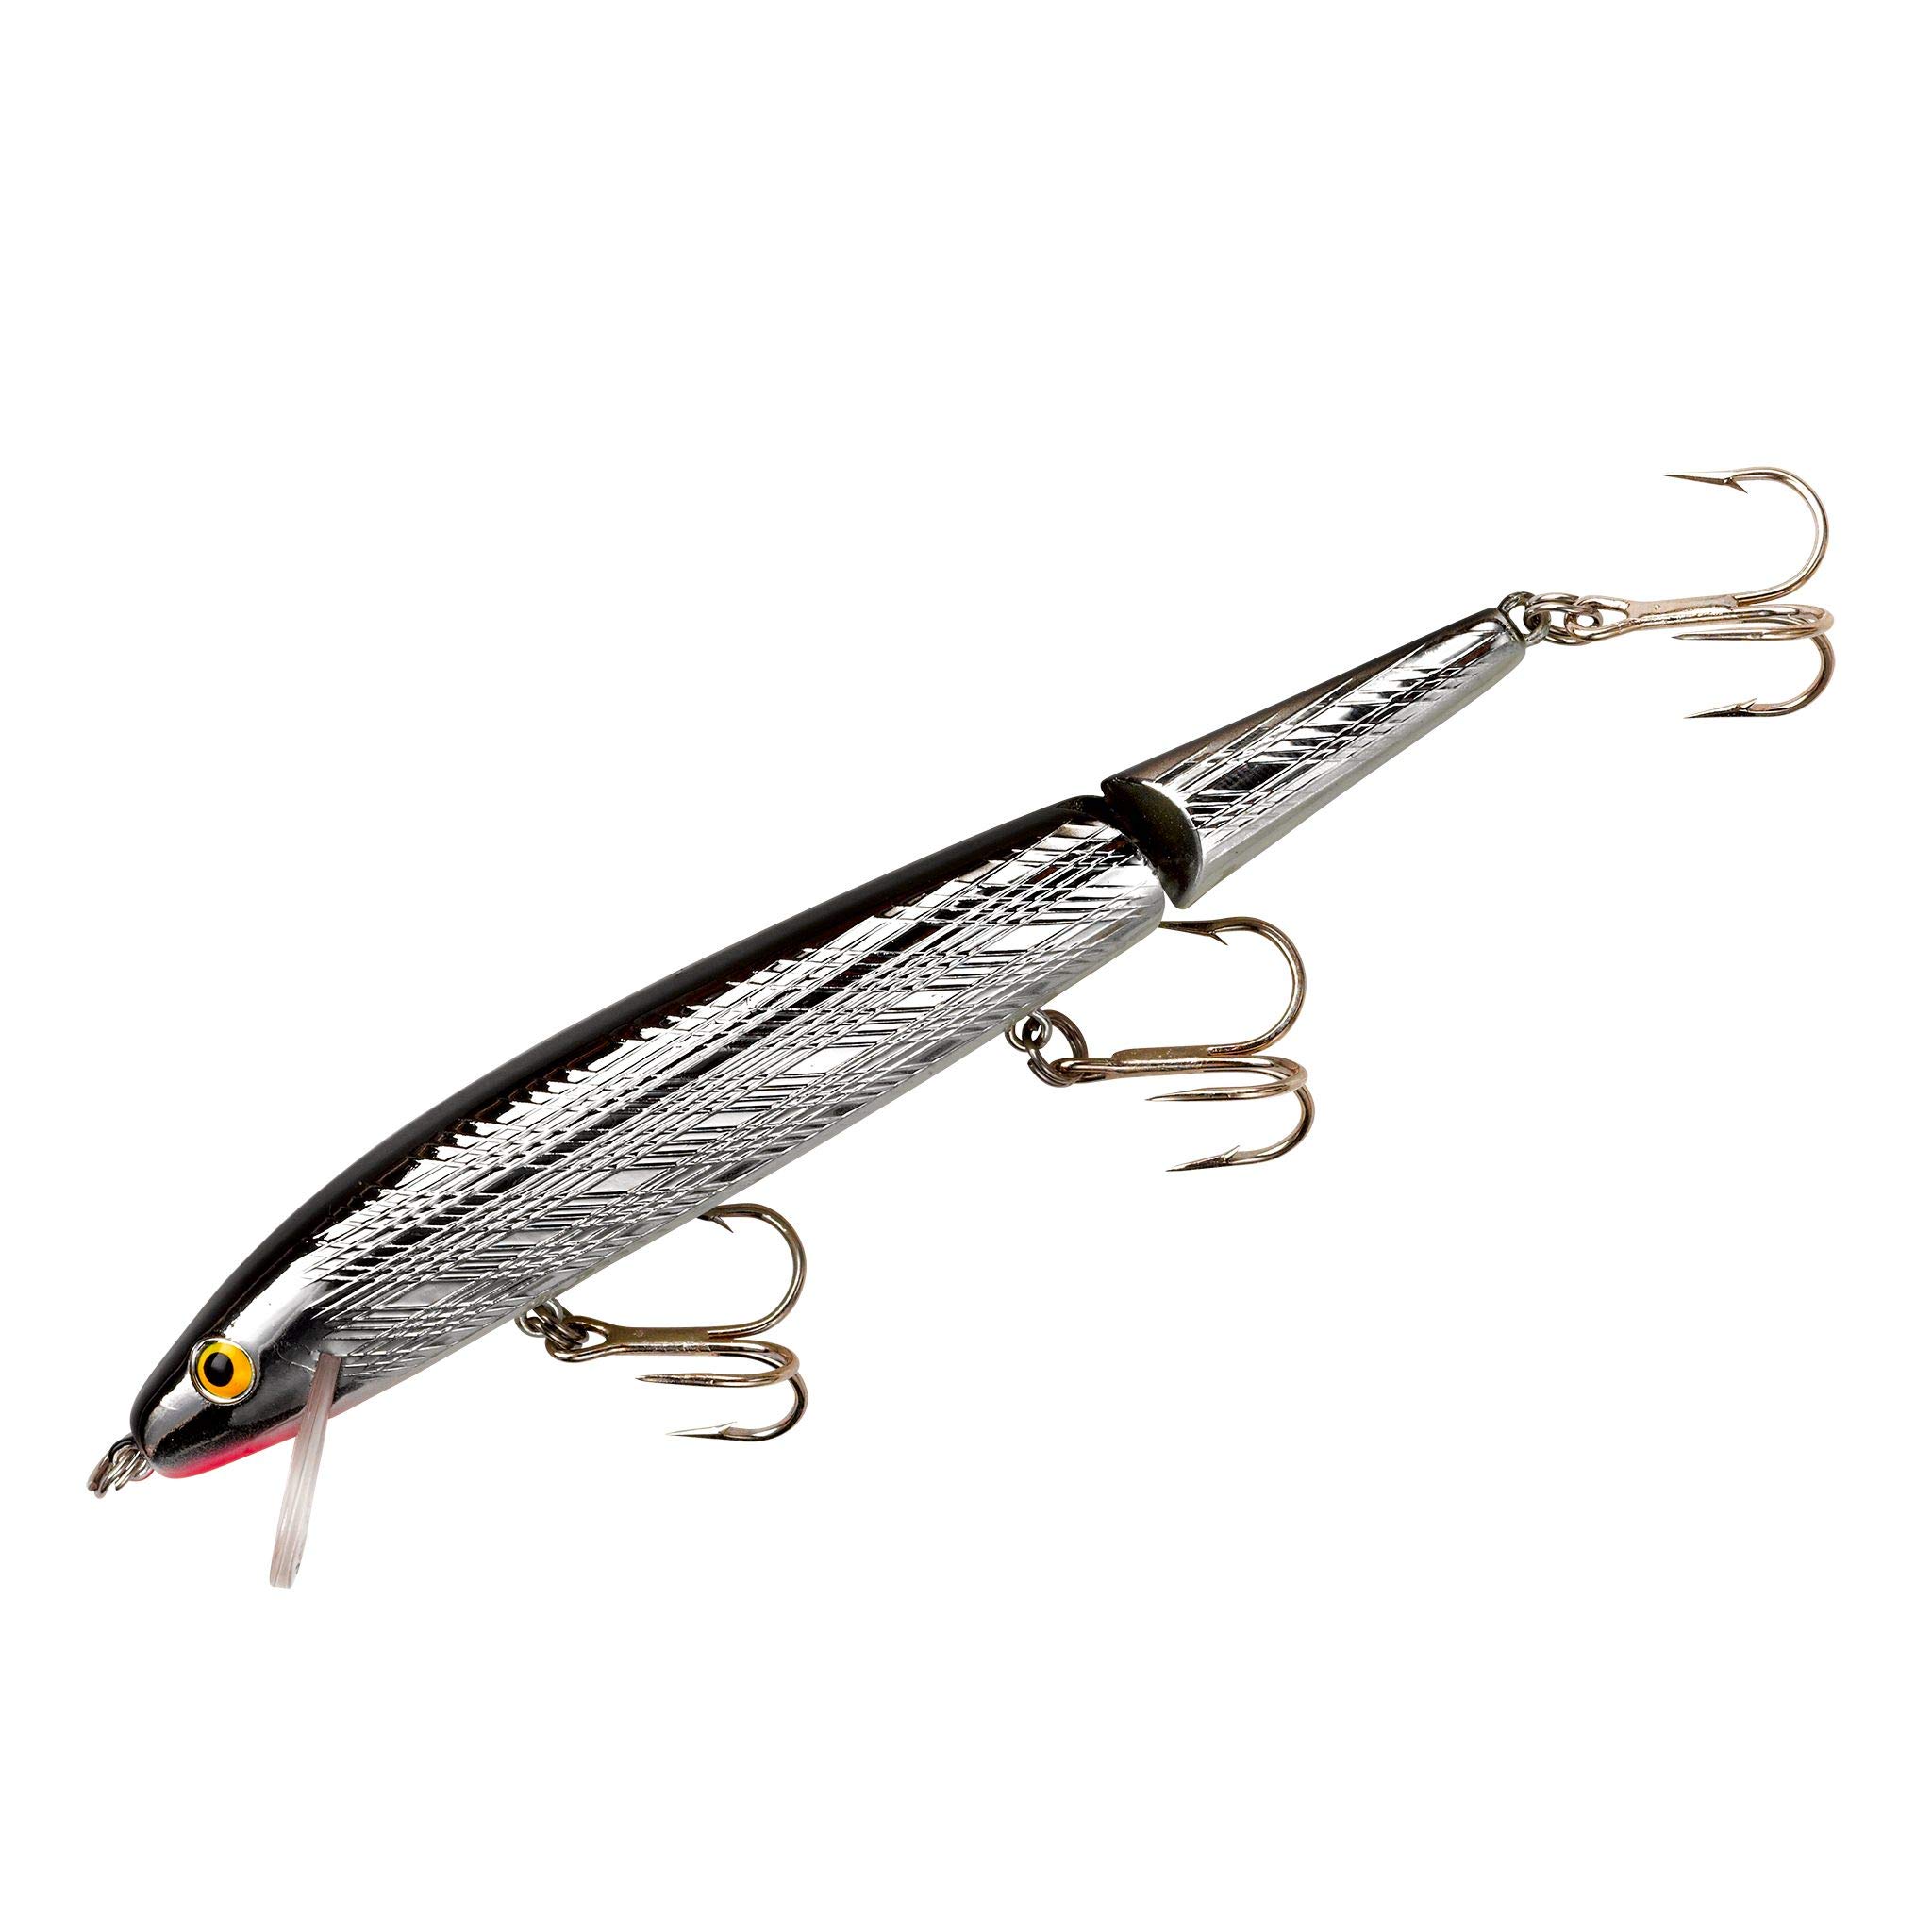 Rebel Lures Jointed Minnow Crankbait Fishing Lure 1 7/8 in, 3/32